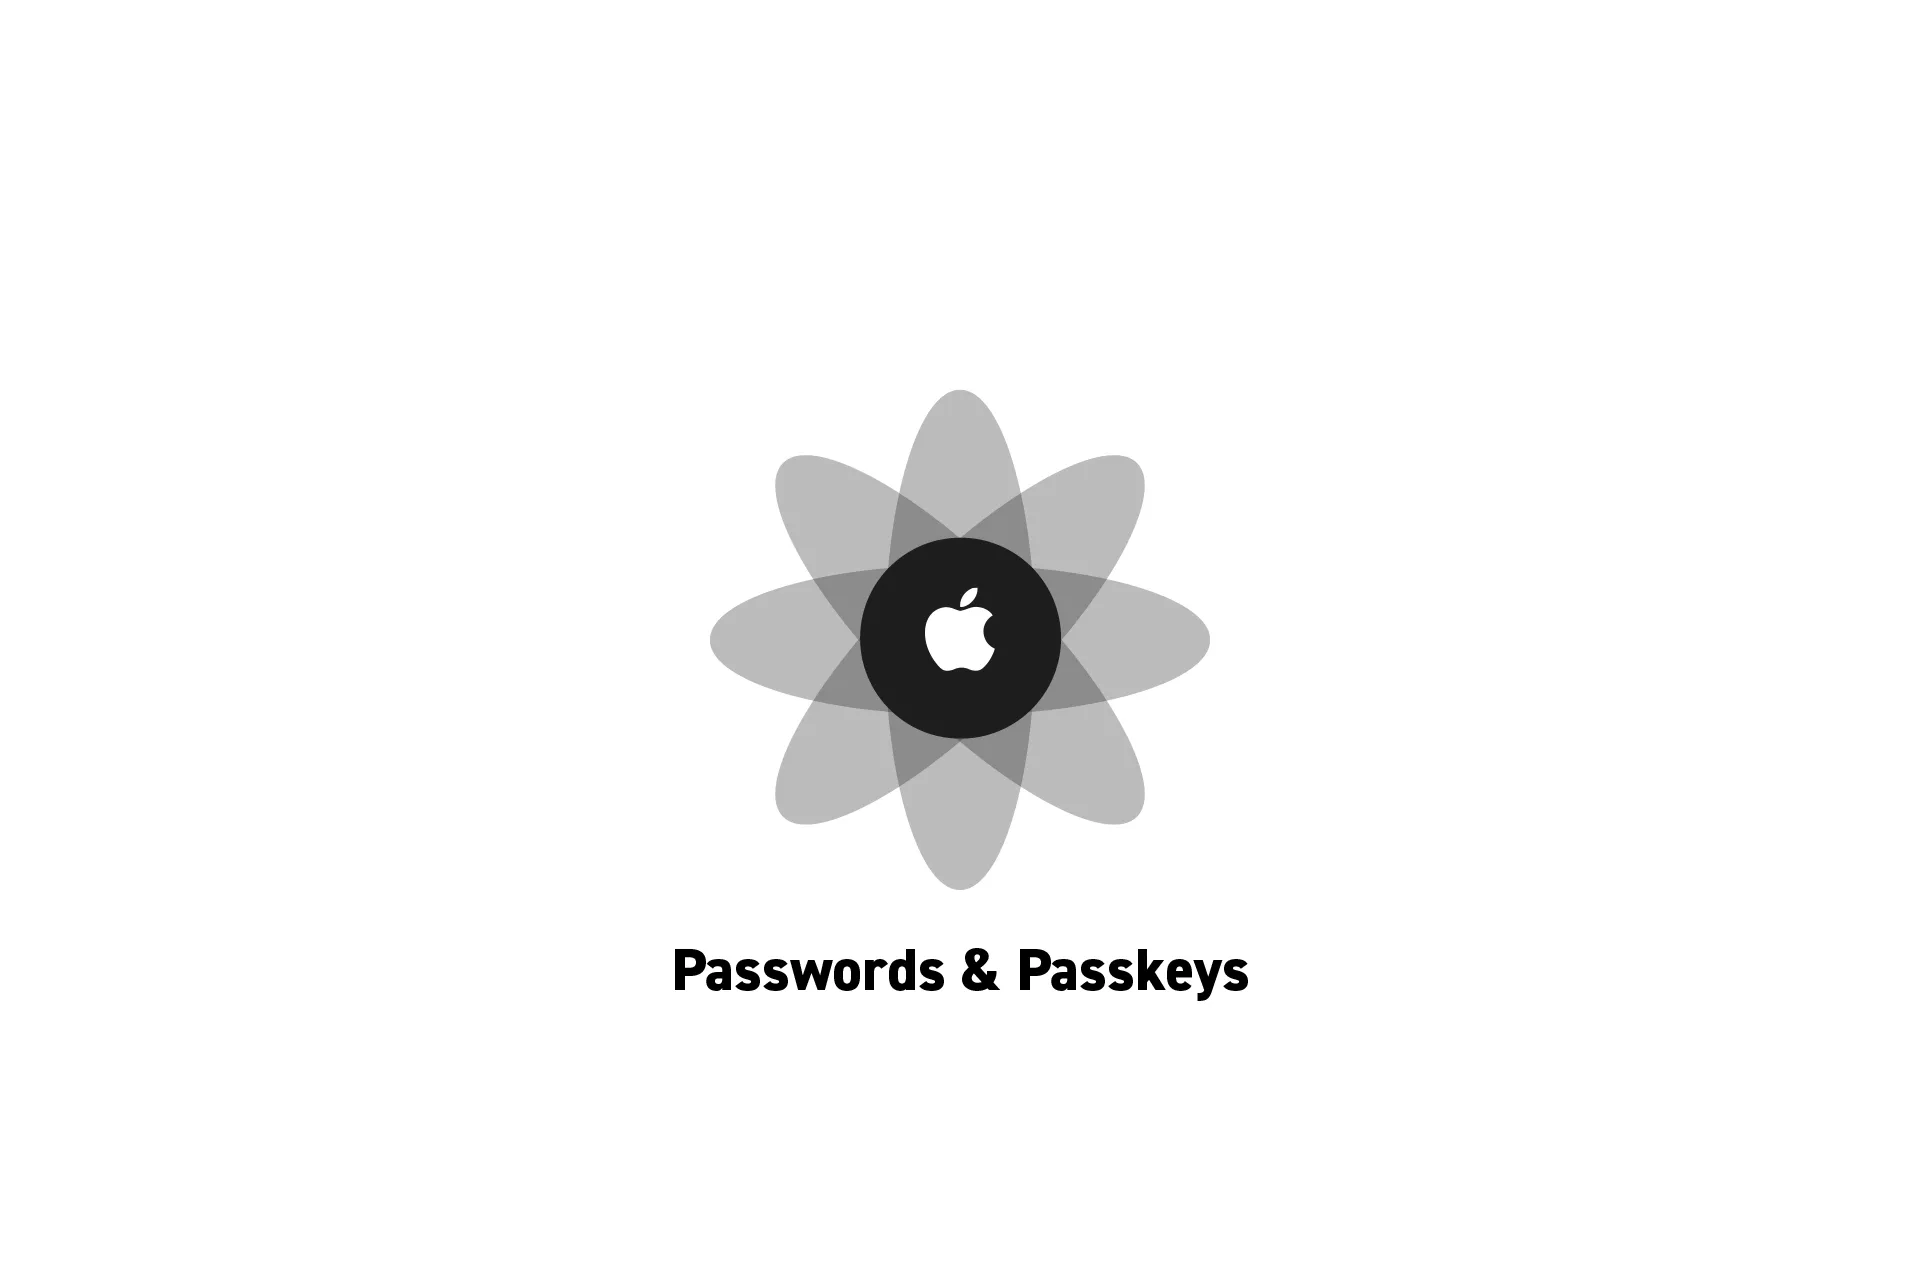 A flower that represents Passwords and Passkeys. Beneath it sits the text "Passwords &amp; Passkeys."